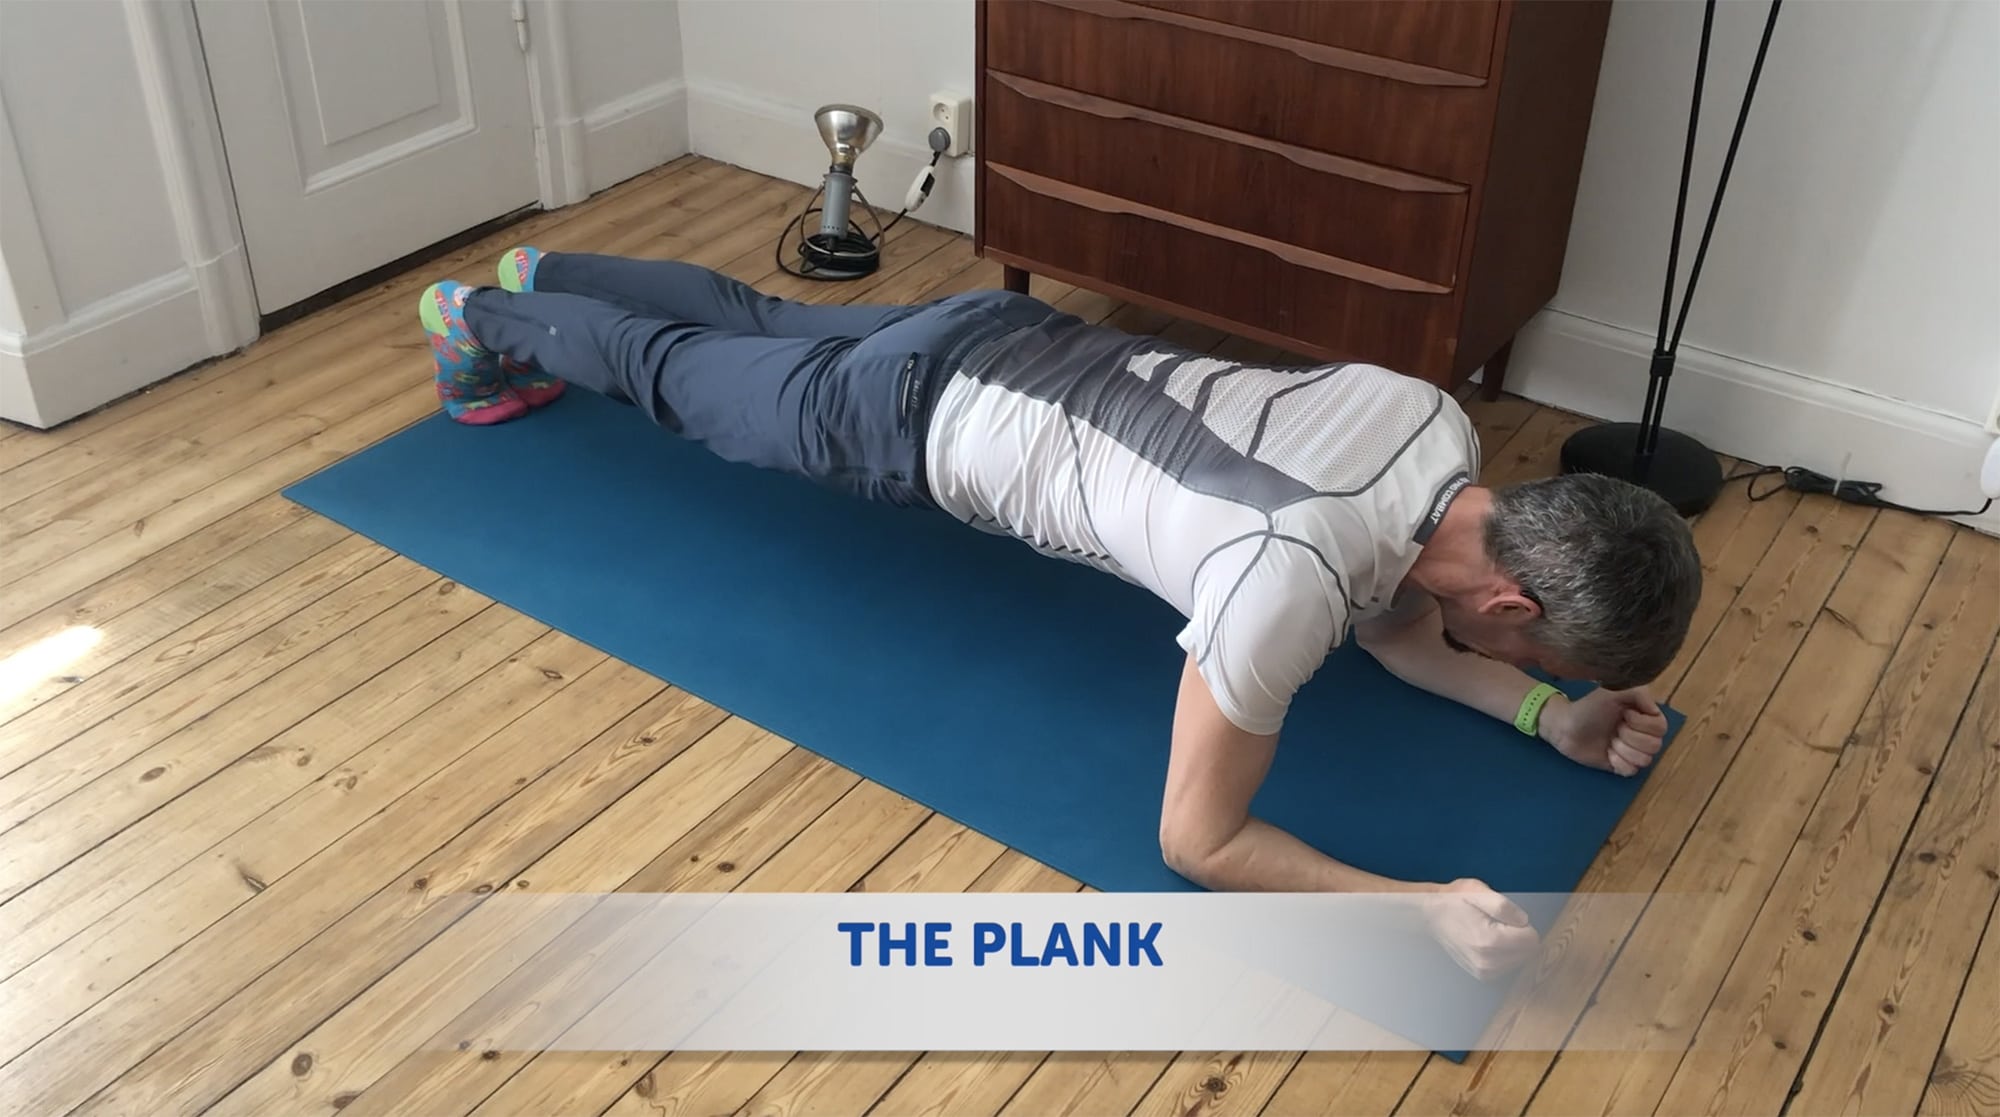 The Plank is harder than it looks